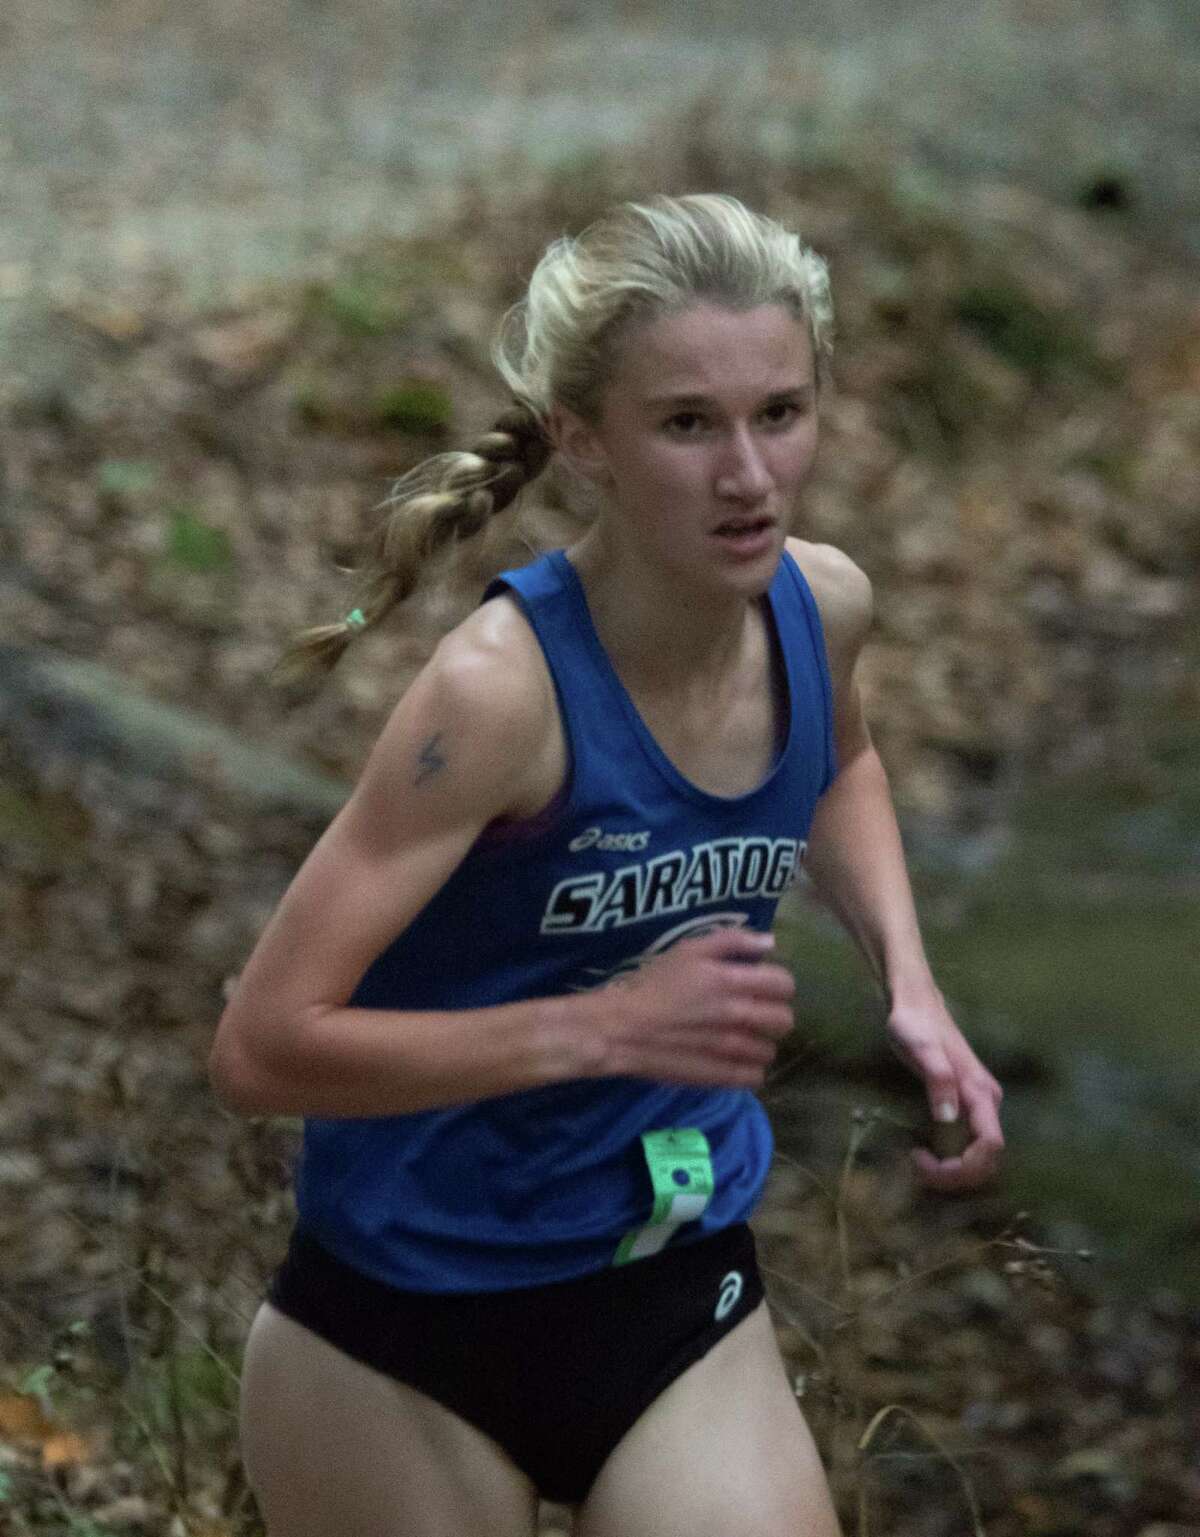 Saratoga's Kelsey Chmiel runs the 5k through Saratoga Spa Park during Suburban Council Championship girls varsity run in Saratoga Springs on Wednesday. Chmiel finished first with a time of 16:45:54. (Jenn March/Special to the Times Union)